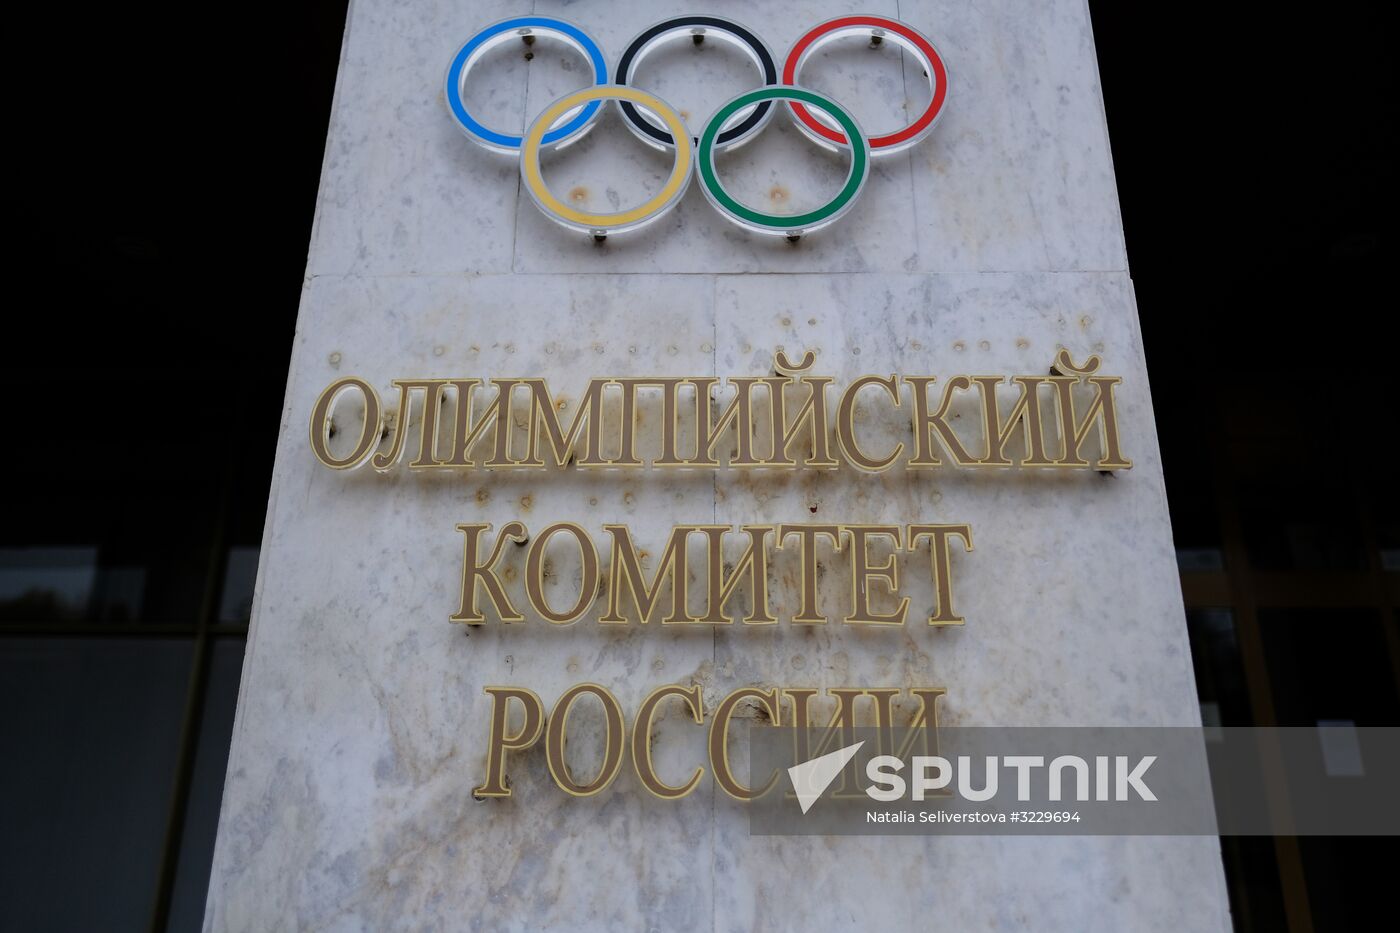 Russia's Olympic Committee